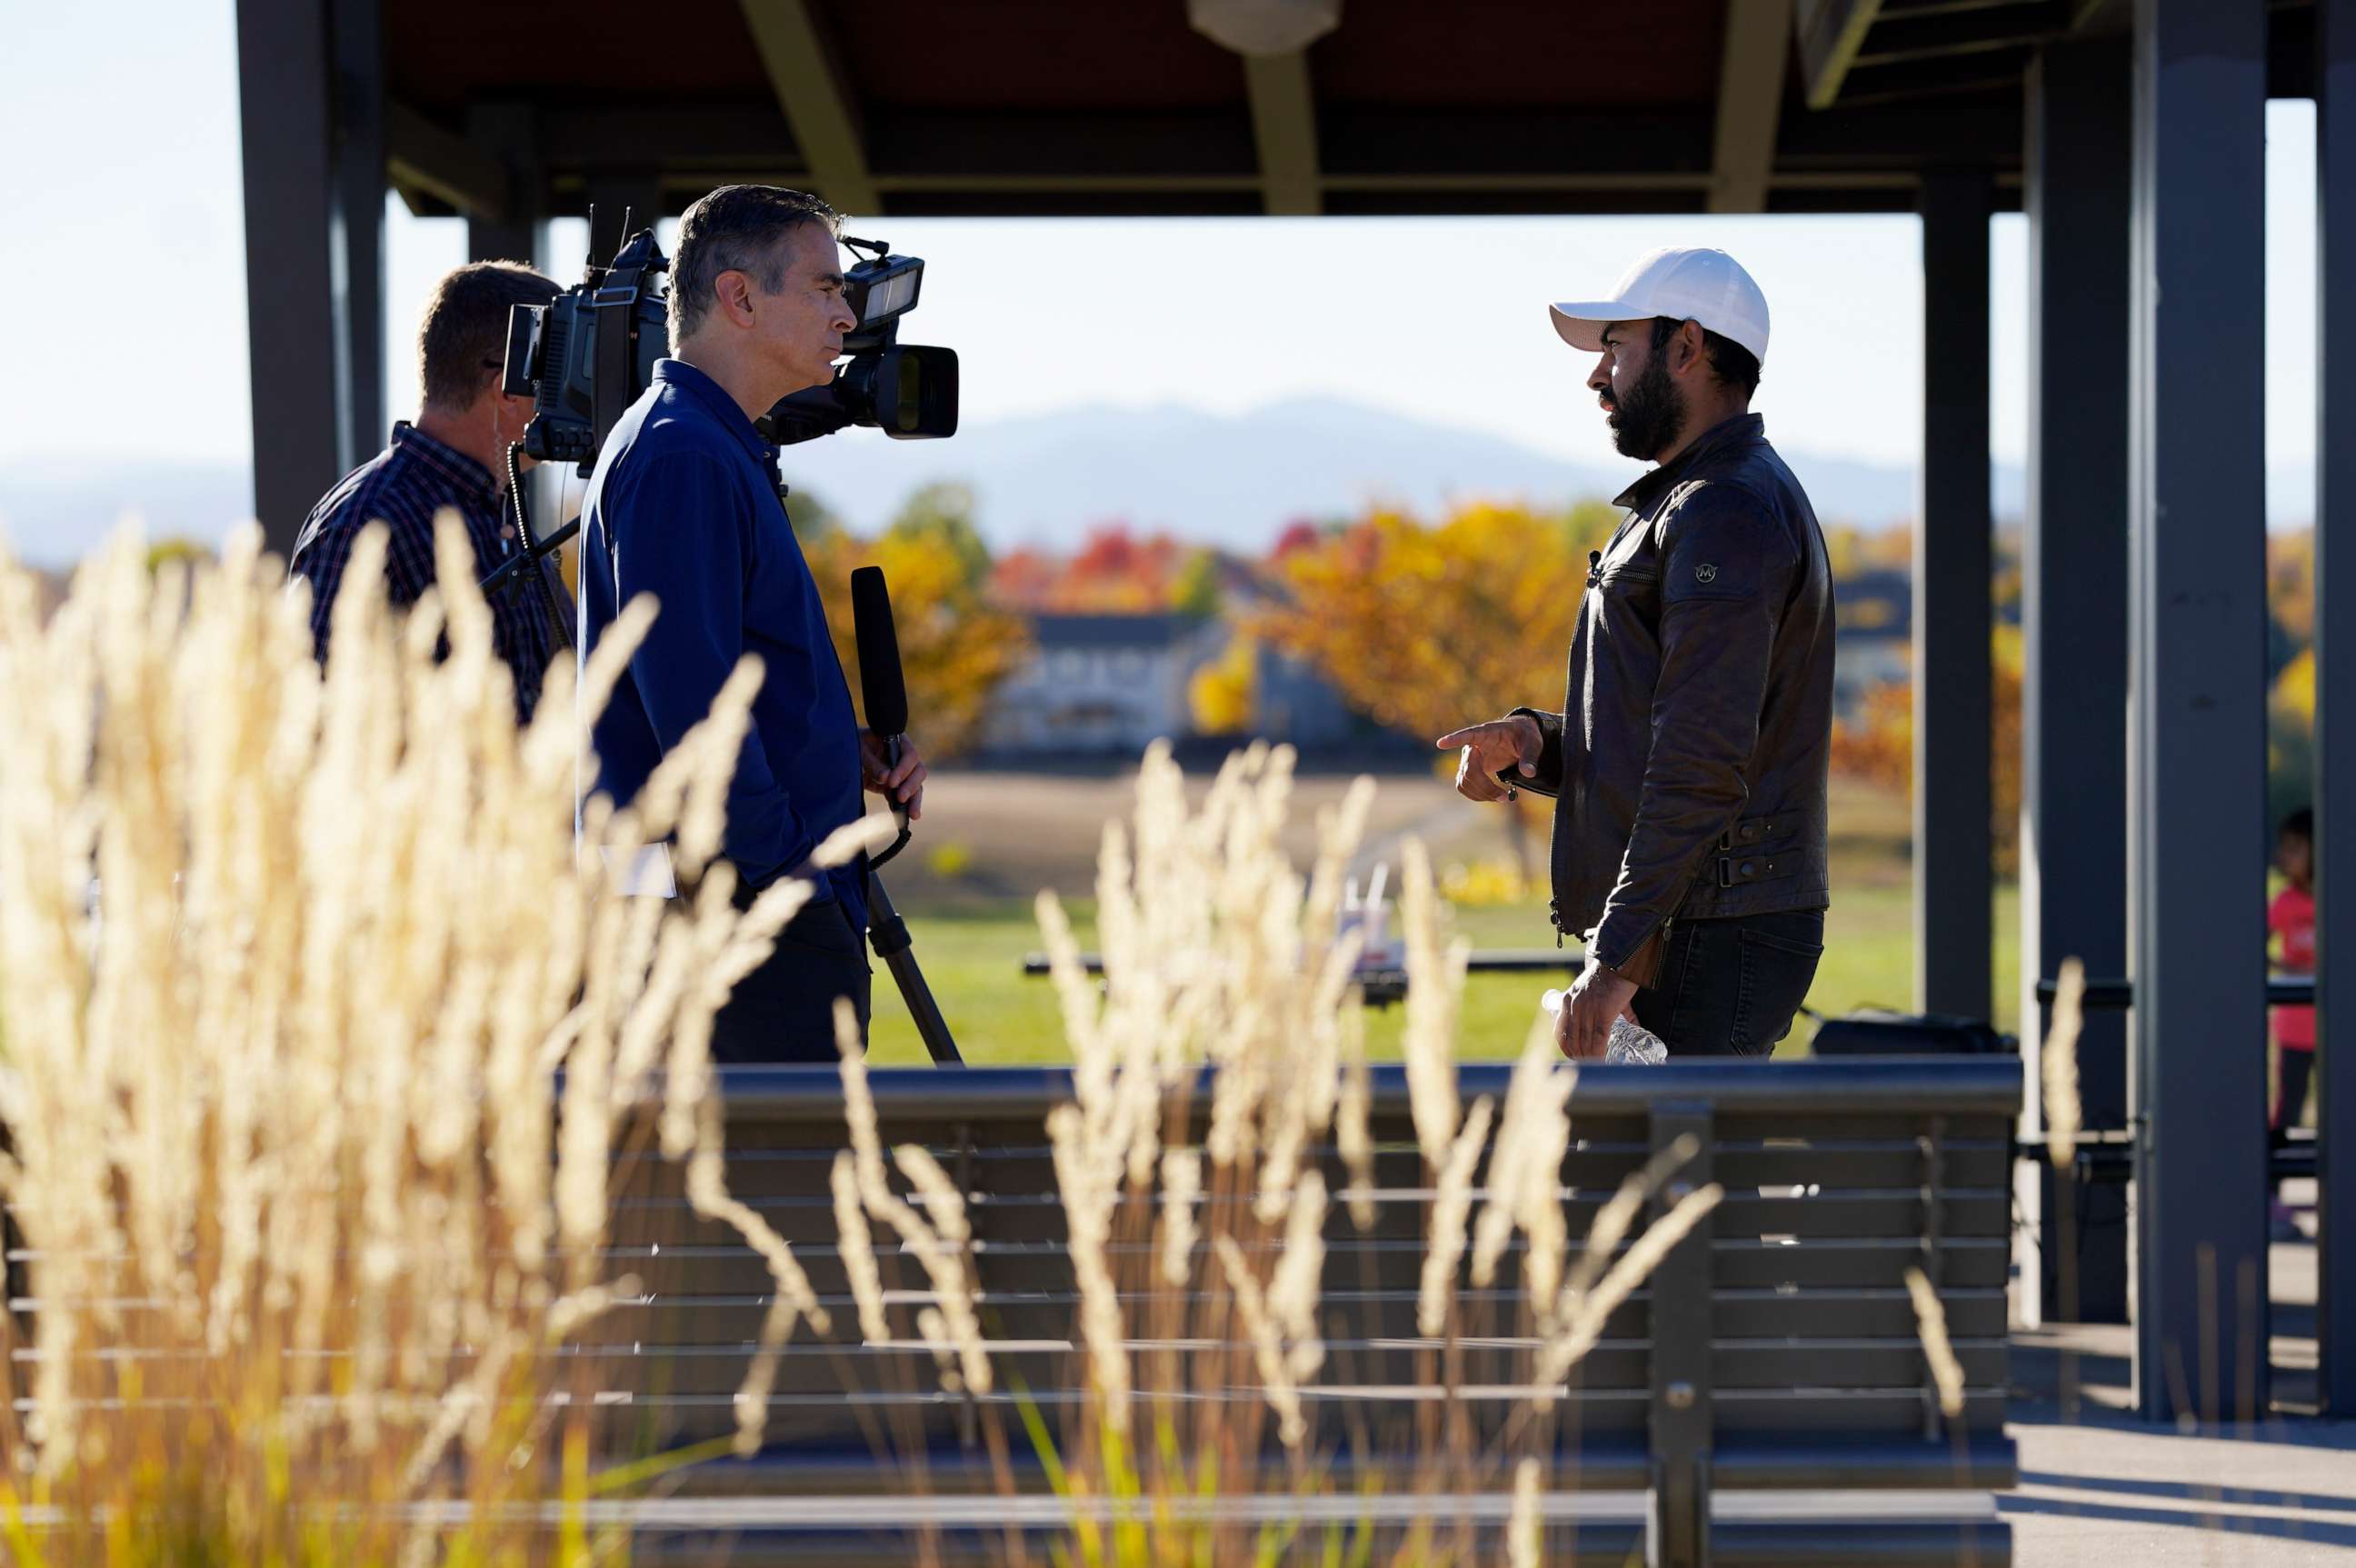 PHOTO: Safi Rauf, speaks to broadcast journalists during an event promoting the Afghan Adjustment Act, Oct. 20, 2022, in Thornton, Colorado.